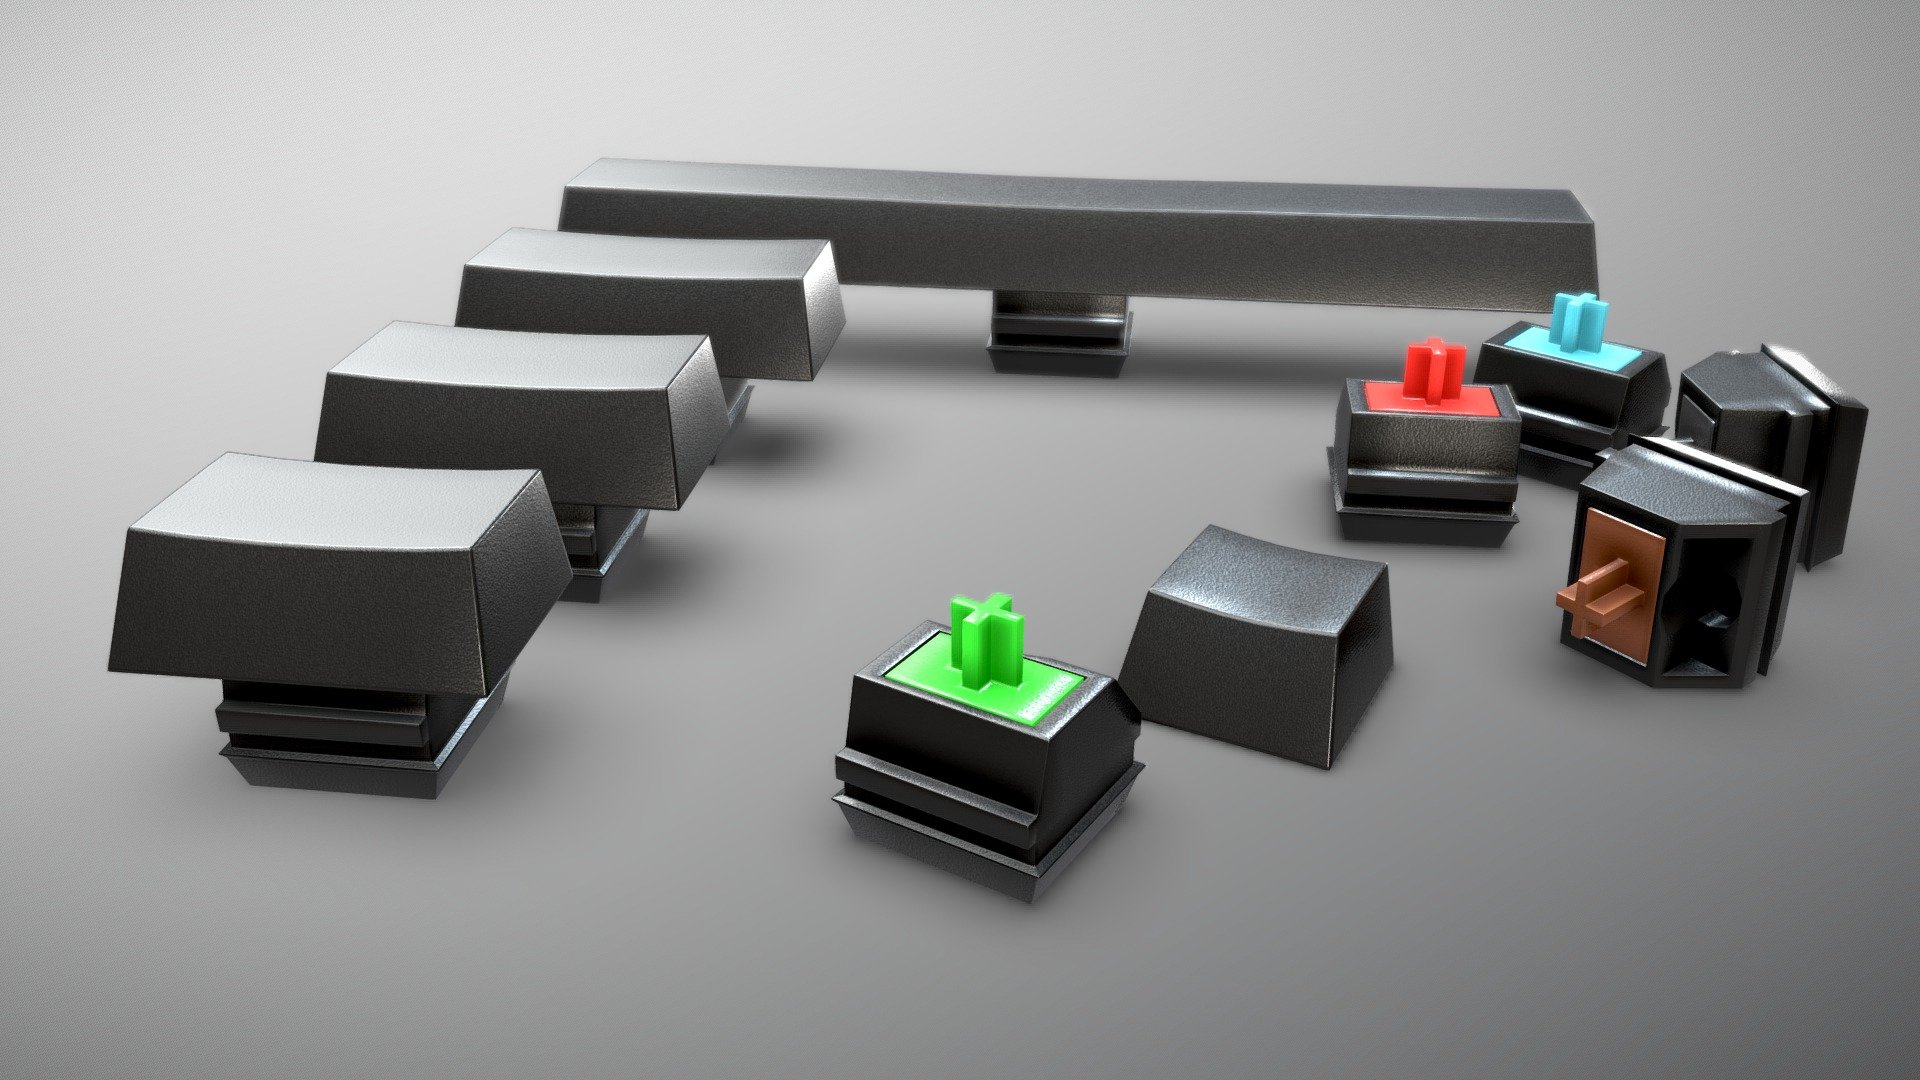 A pack of mechanical keys, with real-world sizes, fit for interior renders, is VR/AR ready, with a PBR workflow, and even suitable as a game asset.

The model contains a Zip file, with:


2 Versions for every file format: Beveled - suitable for subdivision and/or smooth shading, Subdivided - subdivided in advance;
Tailored textures with multiple resolutions (2K, 4K, 6K) for a PBR Metalness workflow, such as DIFFUSE/METALLIC/ROUGHNESS/NORMAL;
Both OpenGL and DirectX normal maps;
An additional preview scene with a camera, lights, and a background;
All model versions have UV unwrapping, appropriate pivot/origin points and object parenting (if needed);
Multiple color versions (5)
A keyboard symbols layout PSD file (and a png image)

Formats: 


fbx.
obj.
dae.
blend.


Scale: Real World - Metric
Dimensions cm: 1.8 x 1.8 up to 11.7 x 2 (0.7 x 0.7 up to 4.6 x 0.8'&lsquo;)
Model parts: 2 per key (keycap and the switch)
Geometry: All quads with few appropriate triangles
 - Mechanical Keys for a Keyboard -Keycaps Switches - Buy Royalty Free 3D model by PatrickZhiaran 3d model